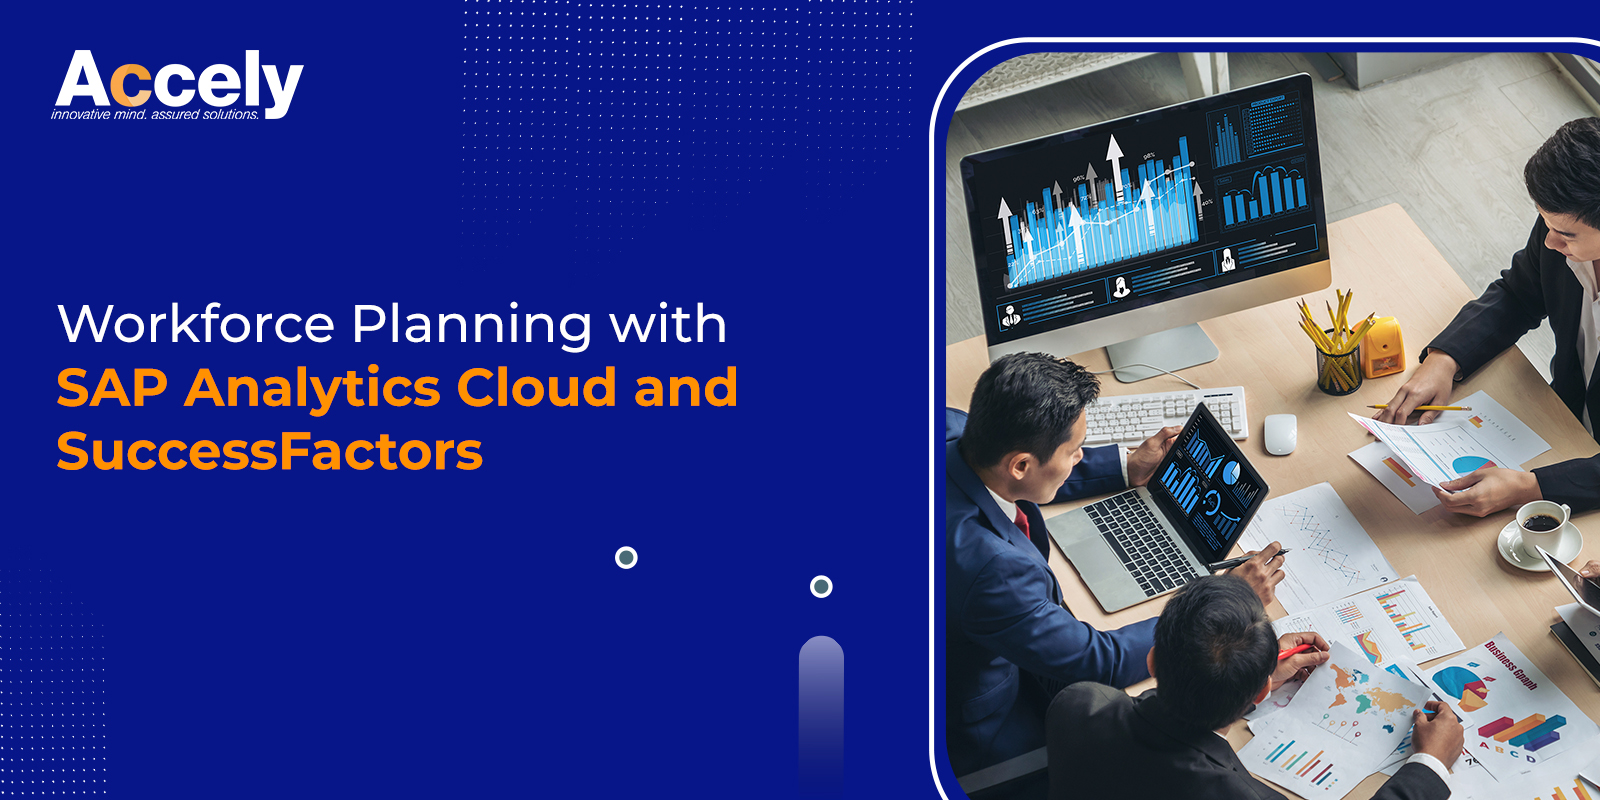 Workforce Planning with SAP Analytics Cloud and SuccessFactors